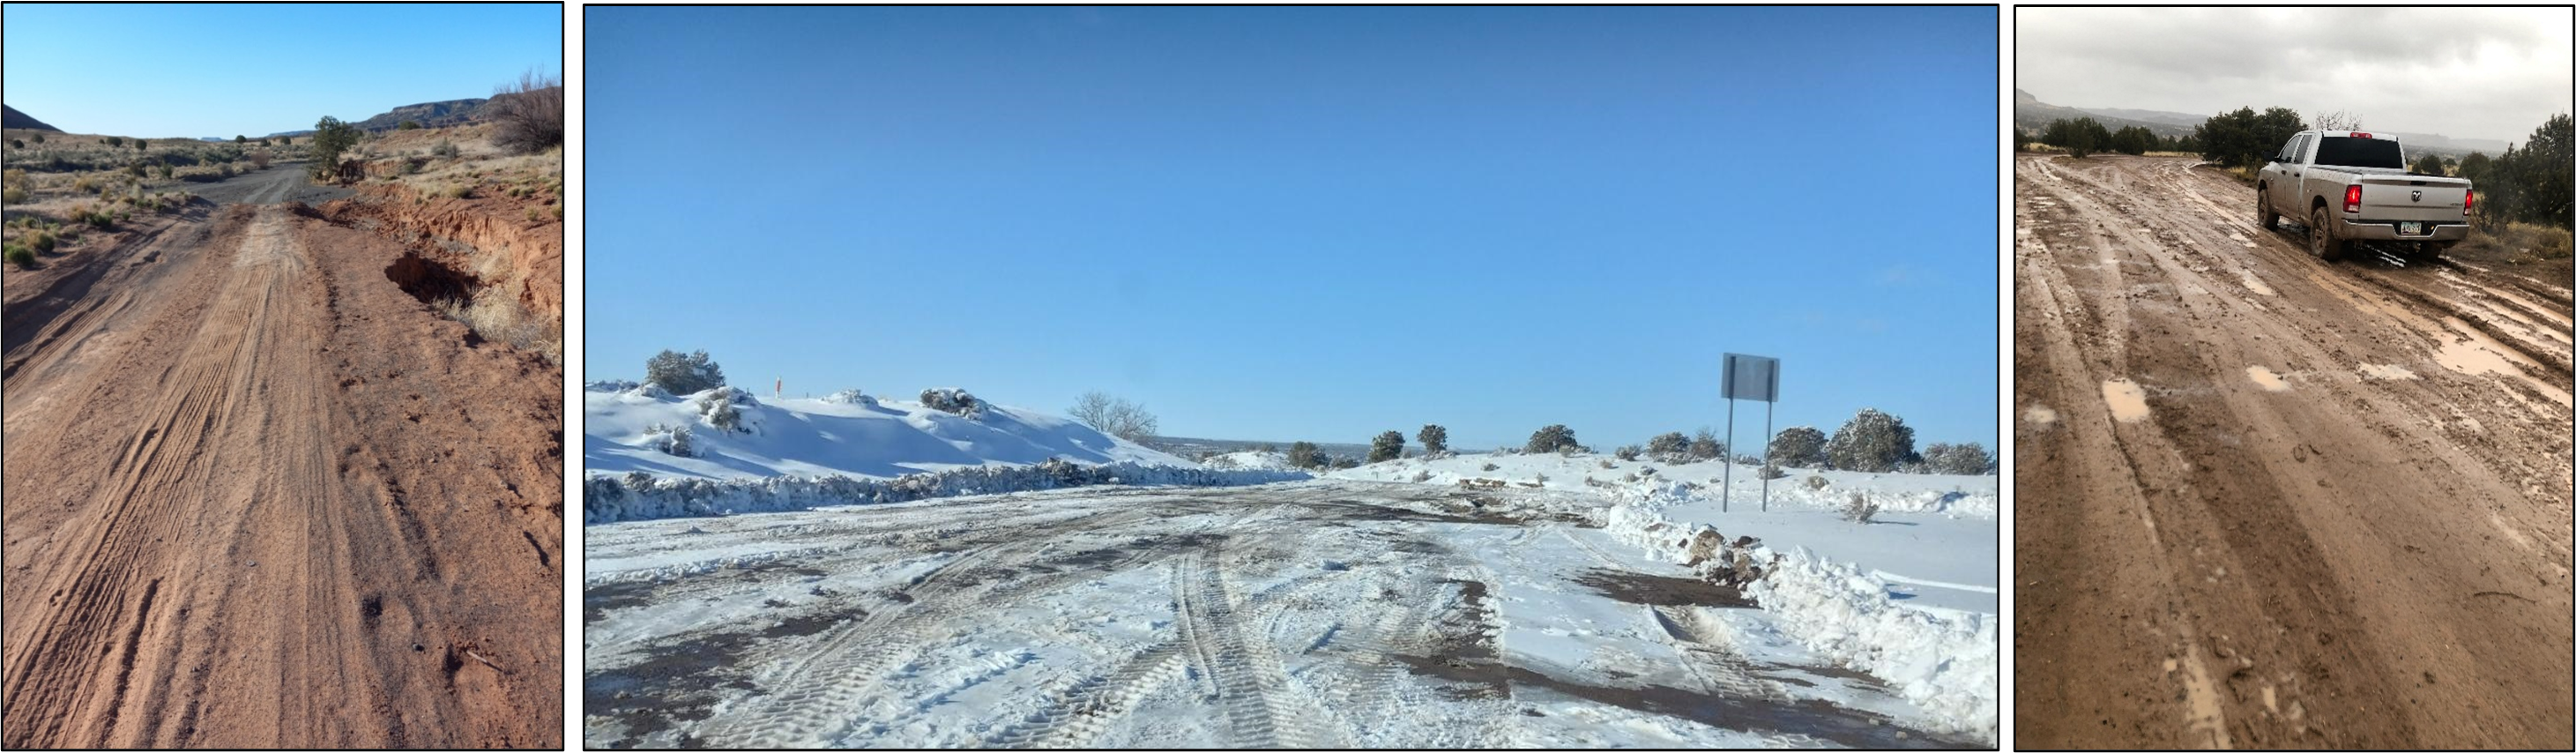 Holbrook Unified School District road conditions